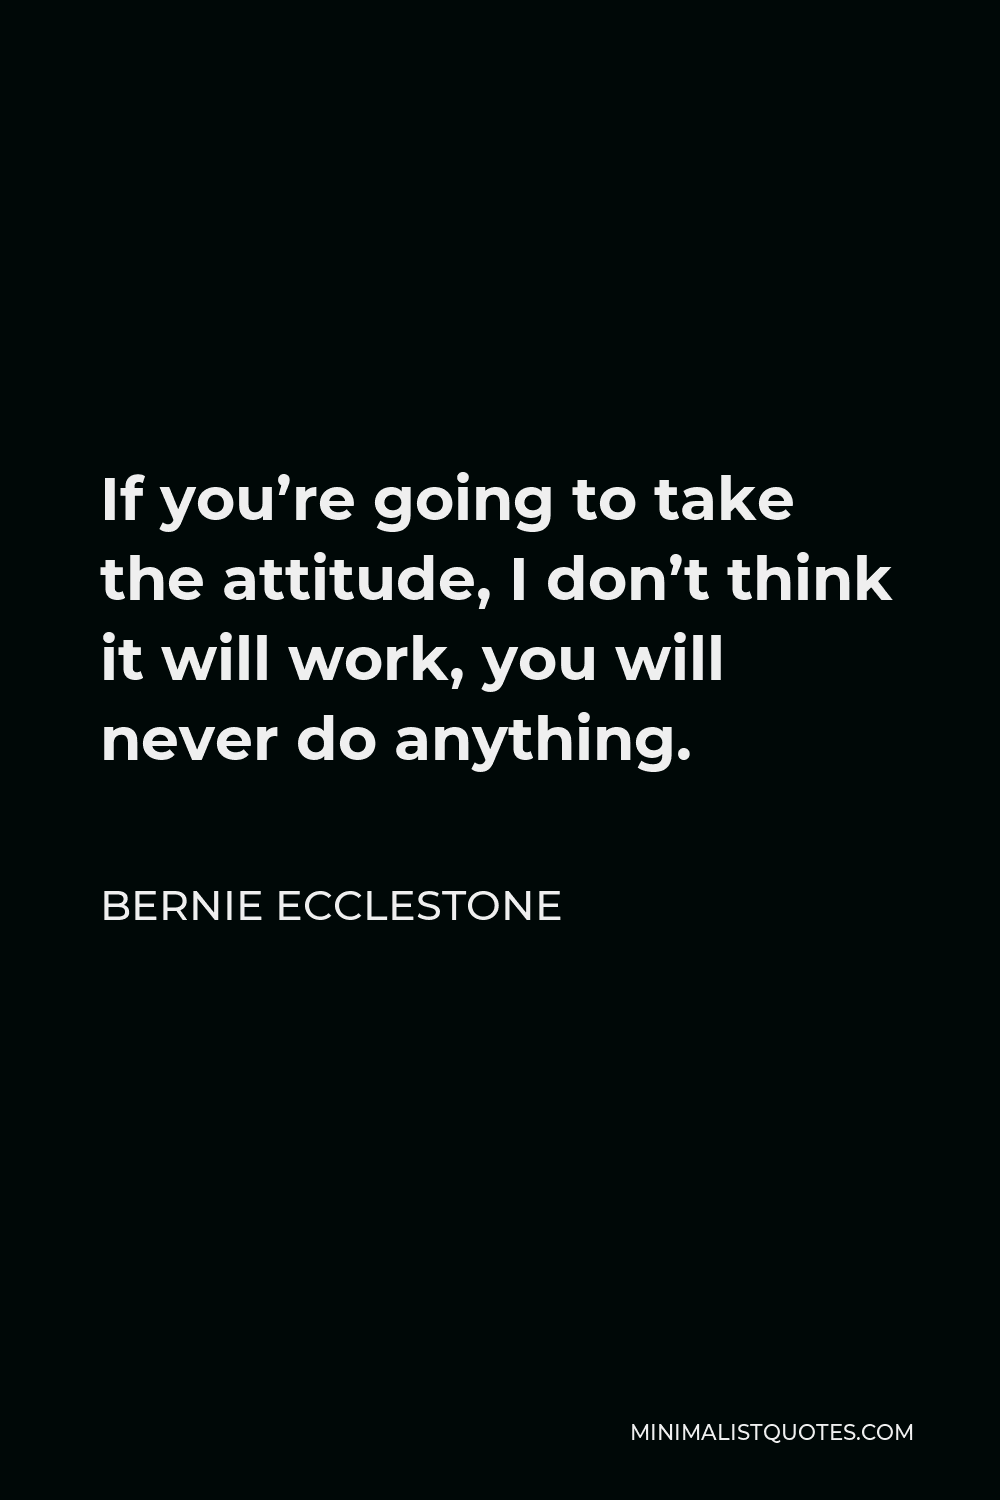 Bernie Ecclestone Quote - If you’re going to take the attitude, I don’t think it will work, you will never do anything.